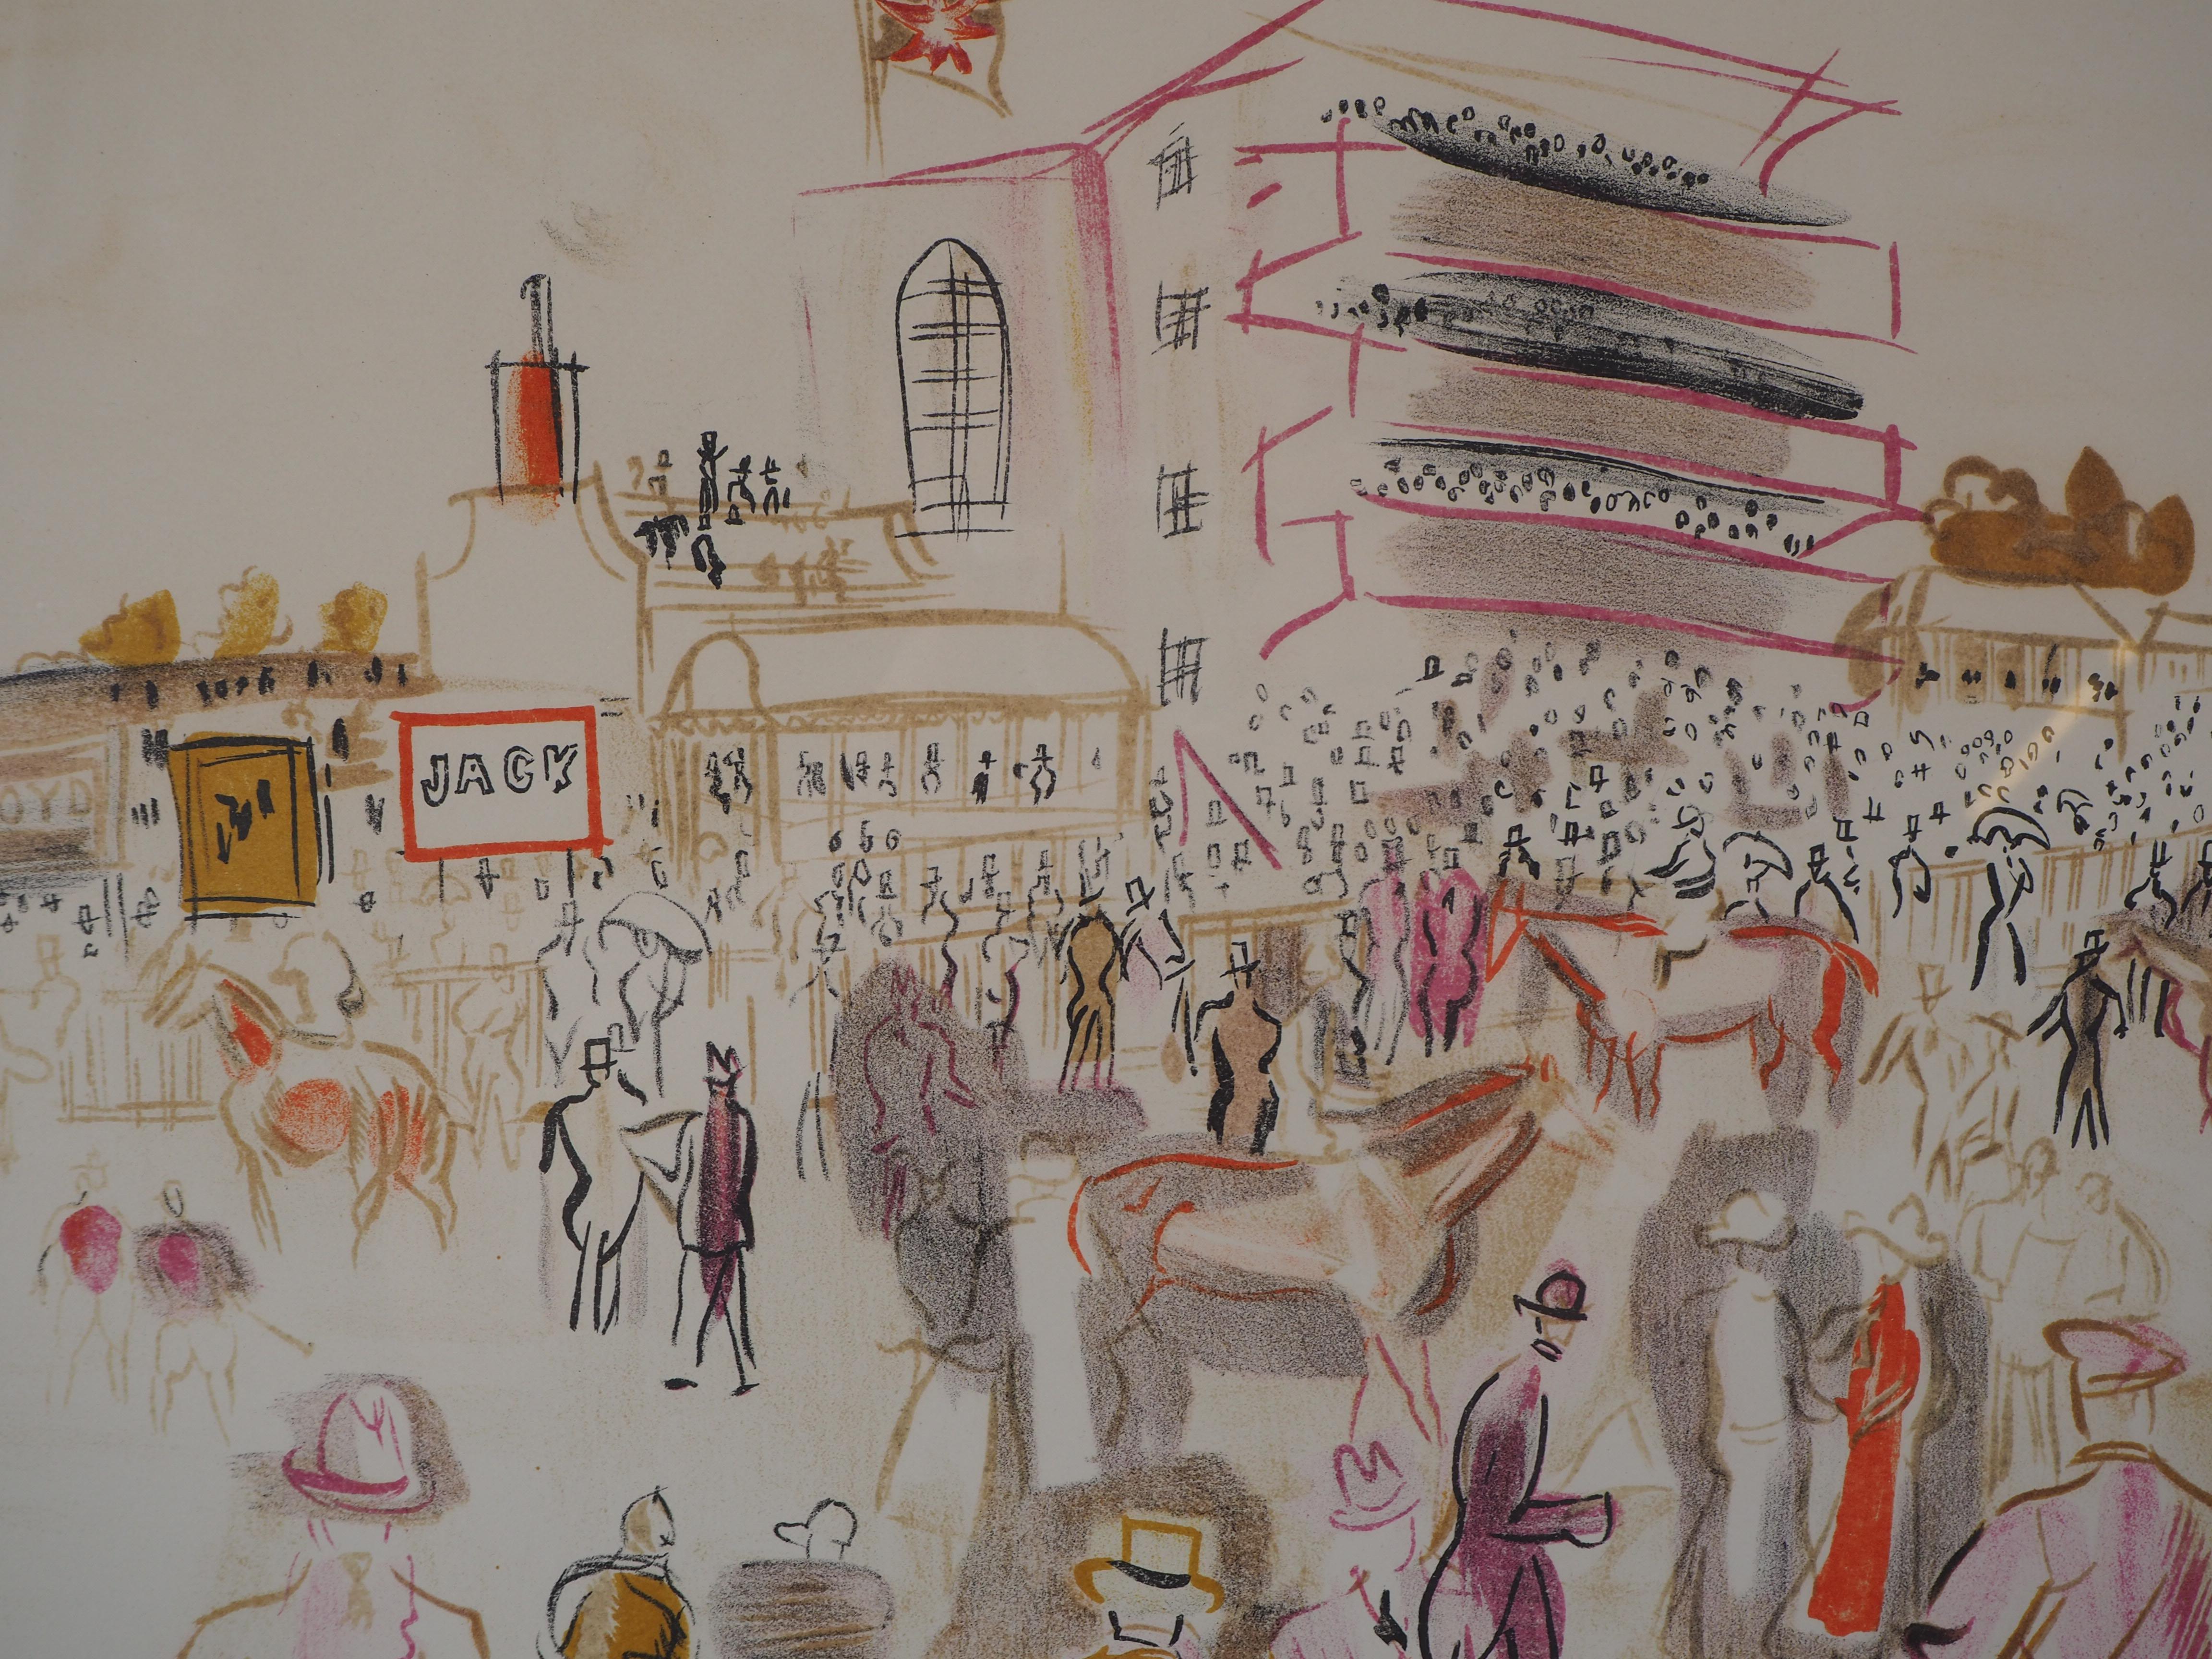 Epsom : The Hippodome before the Race - Original lithograph # Ltd 50 copies - Gray Figurative Print by Raoul Dufy